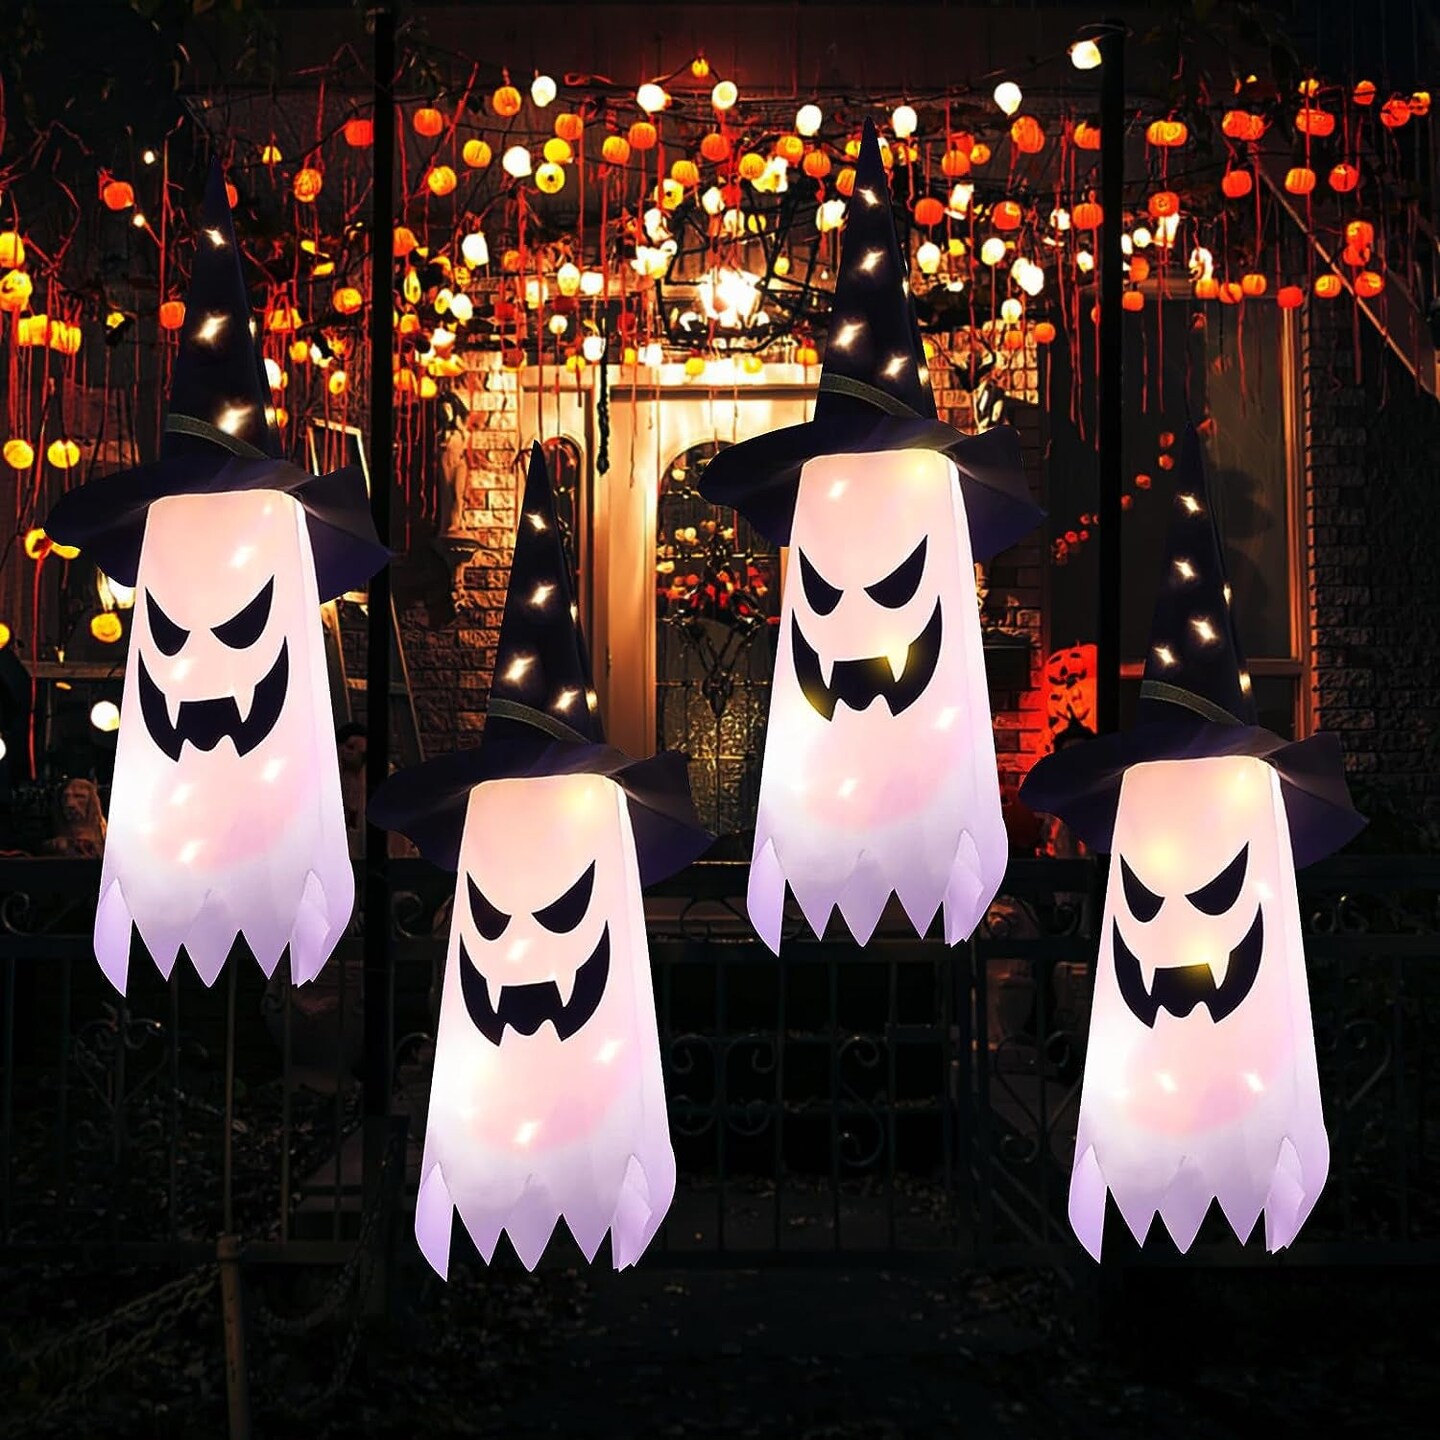  Halloween Decorations Outdoor Decor Hanging Lighted